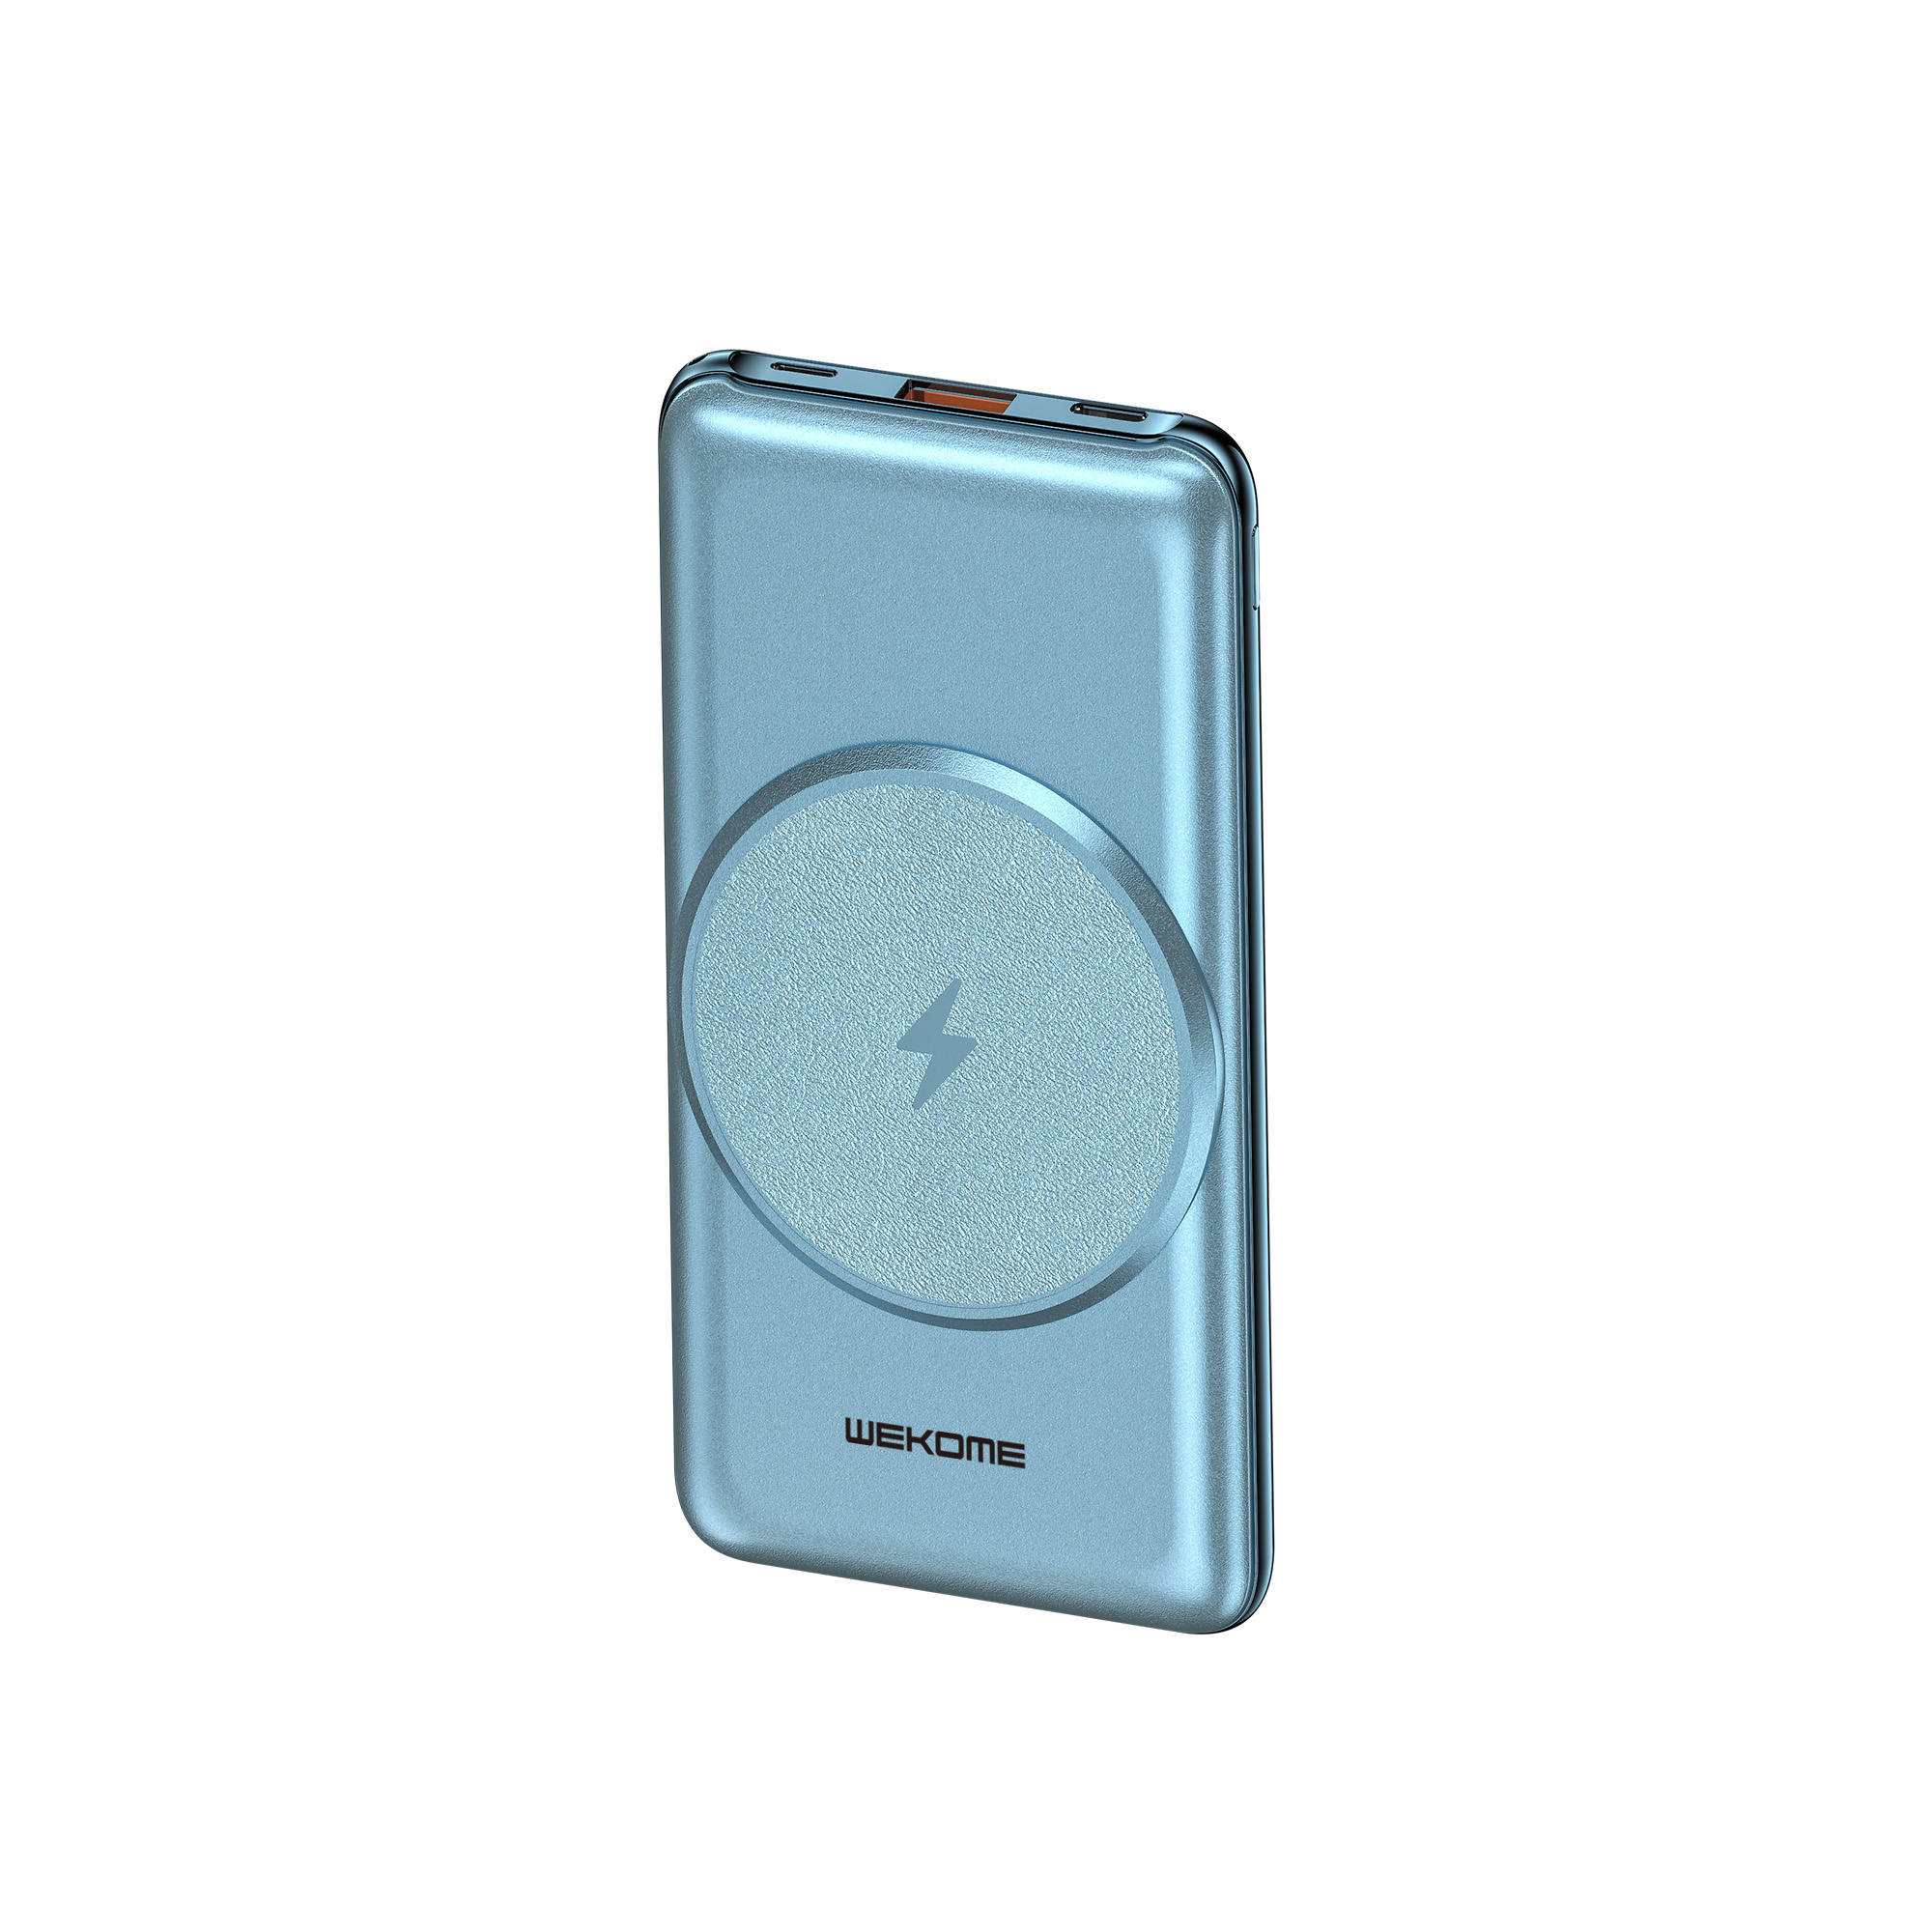 WEKOME Portable Magnets 15W Wireless Power Bank